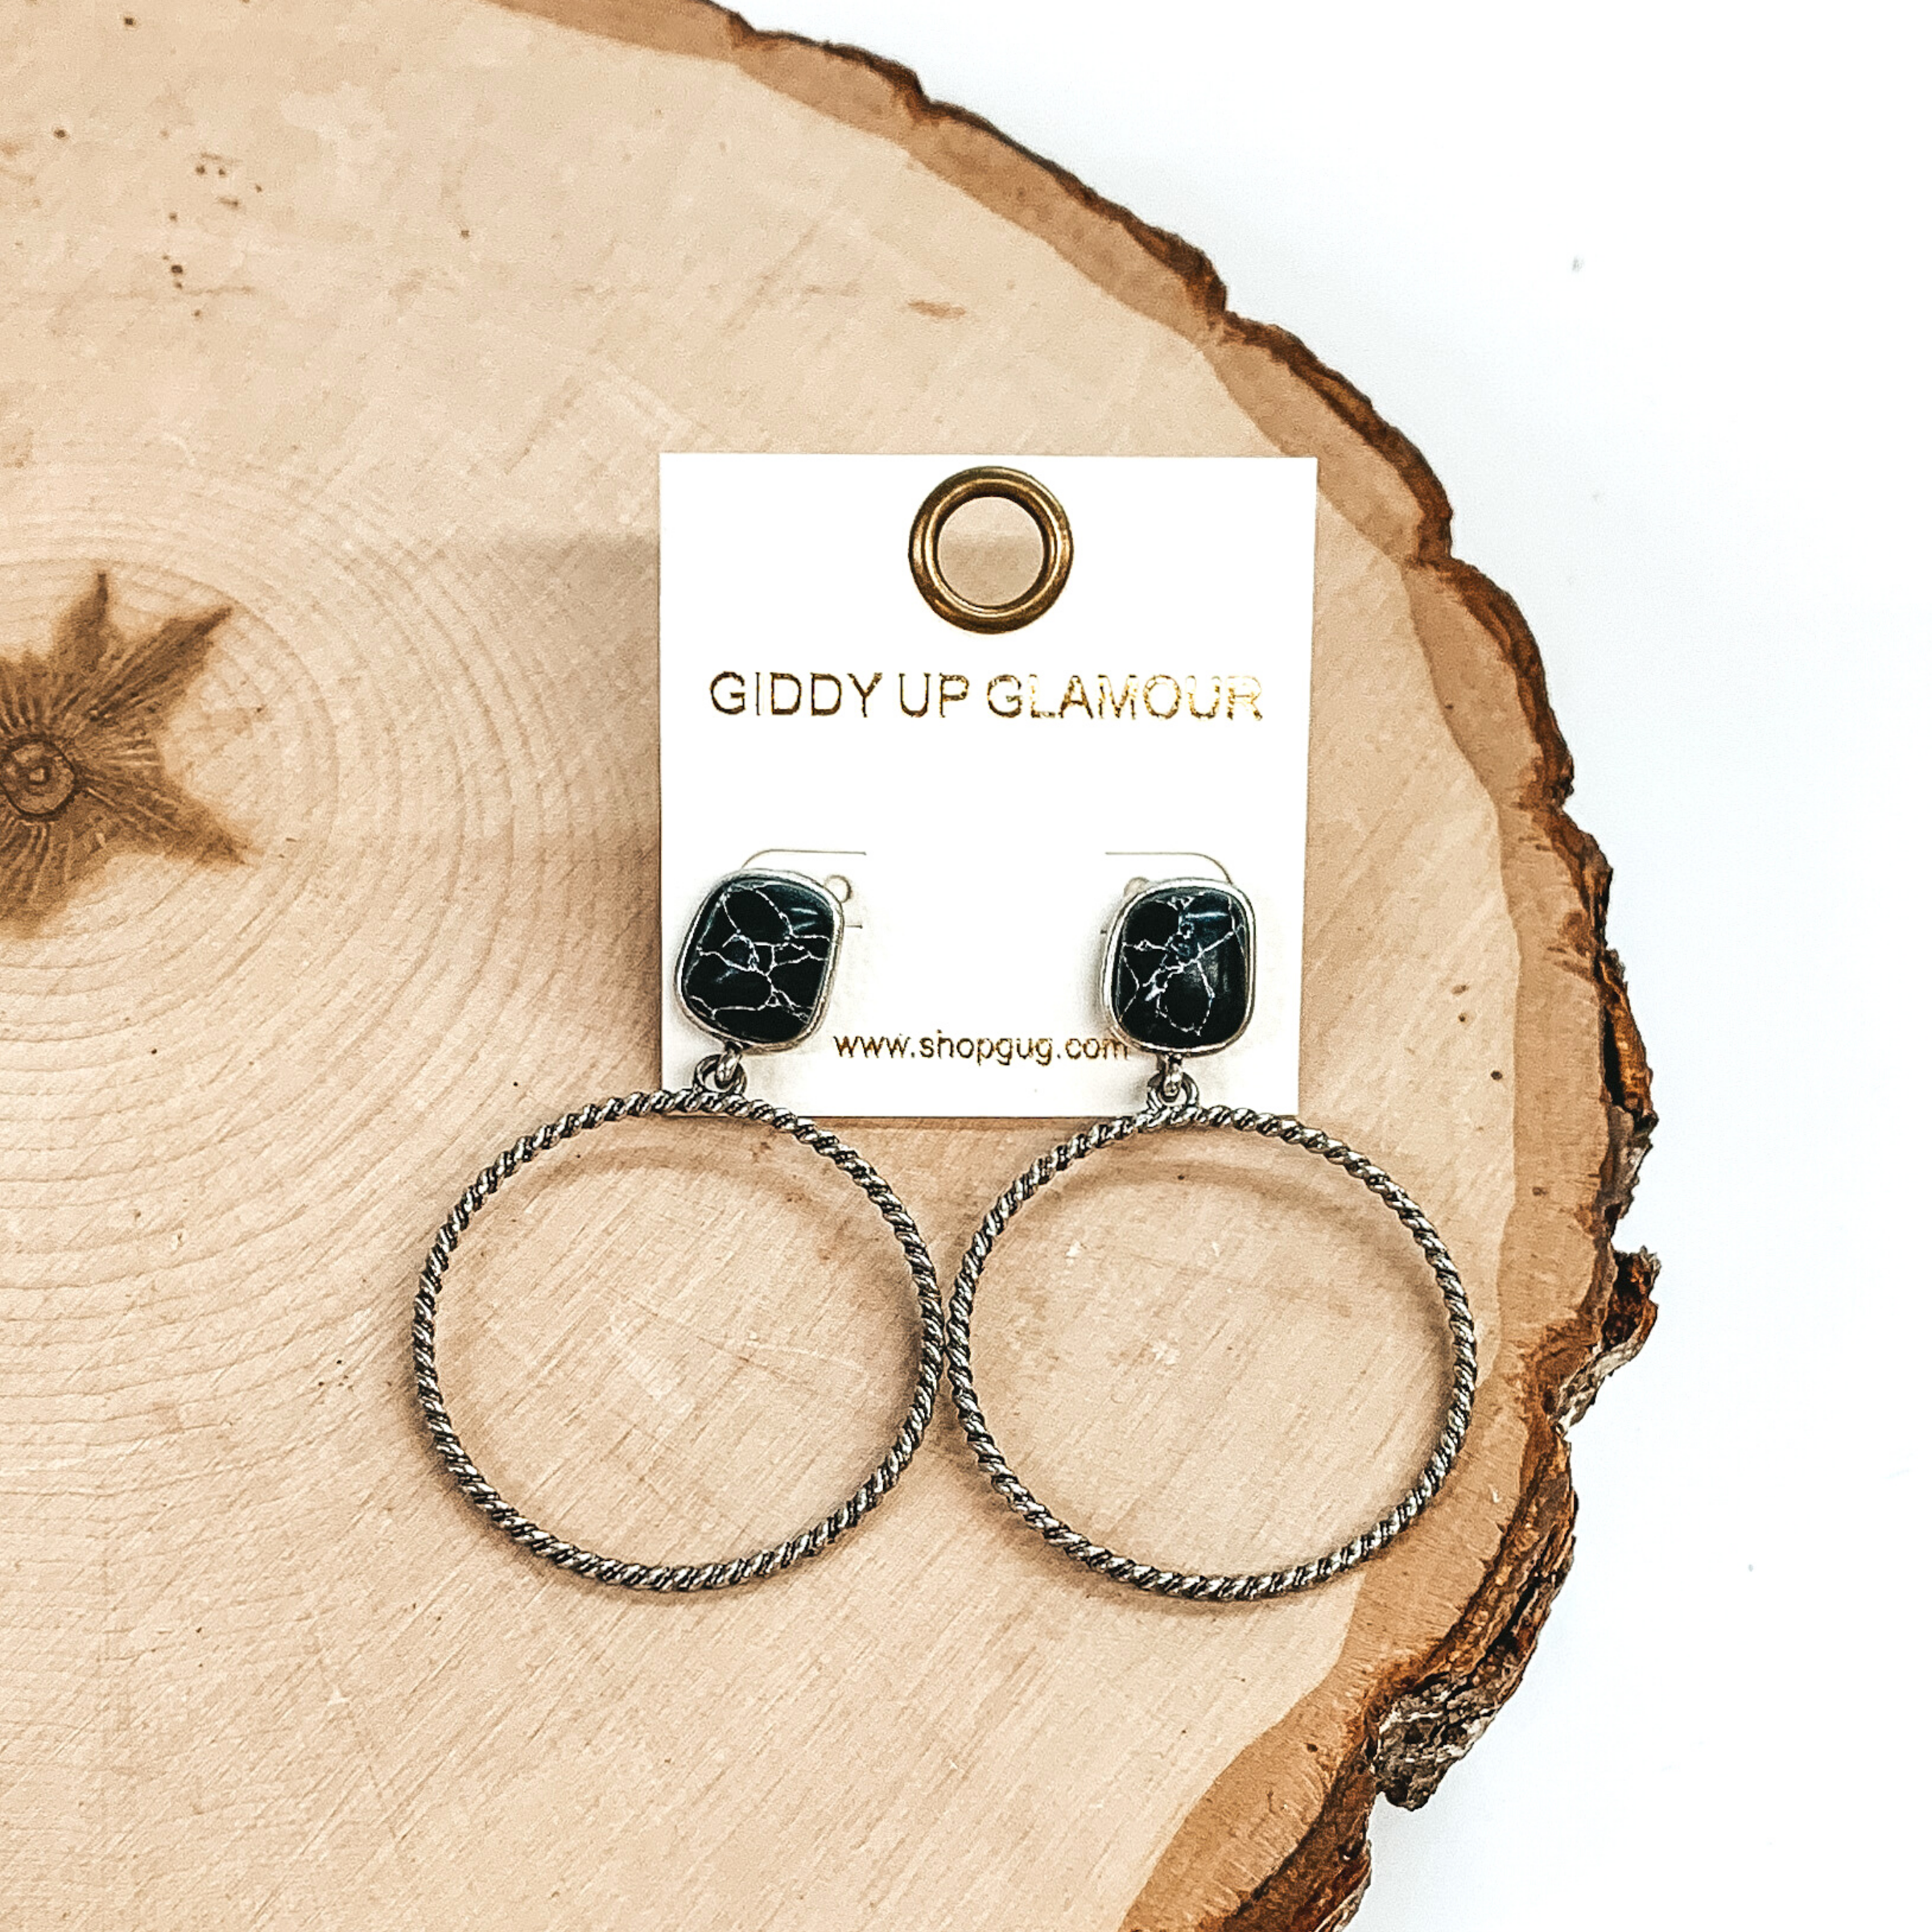 Rounded, square stone stud earrings in black with a silver, twisted open circle pendant hanging from the bottom. These earrings are pictured on a piece of wood on a white background.